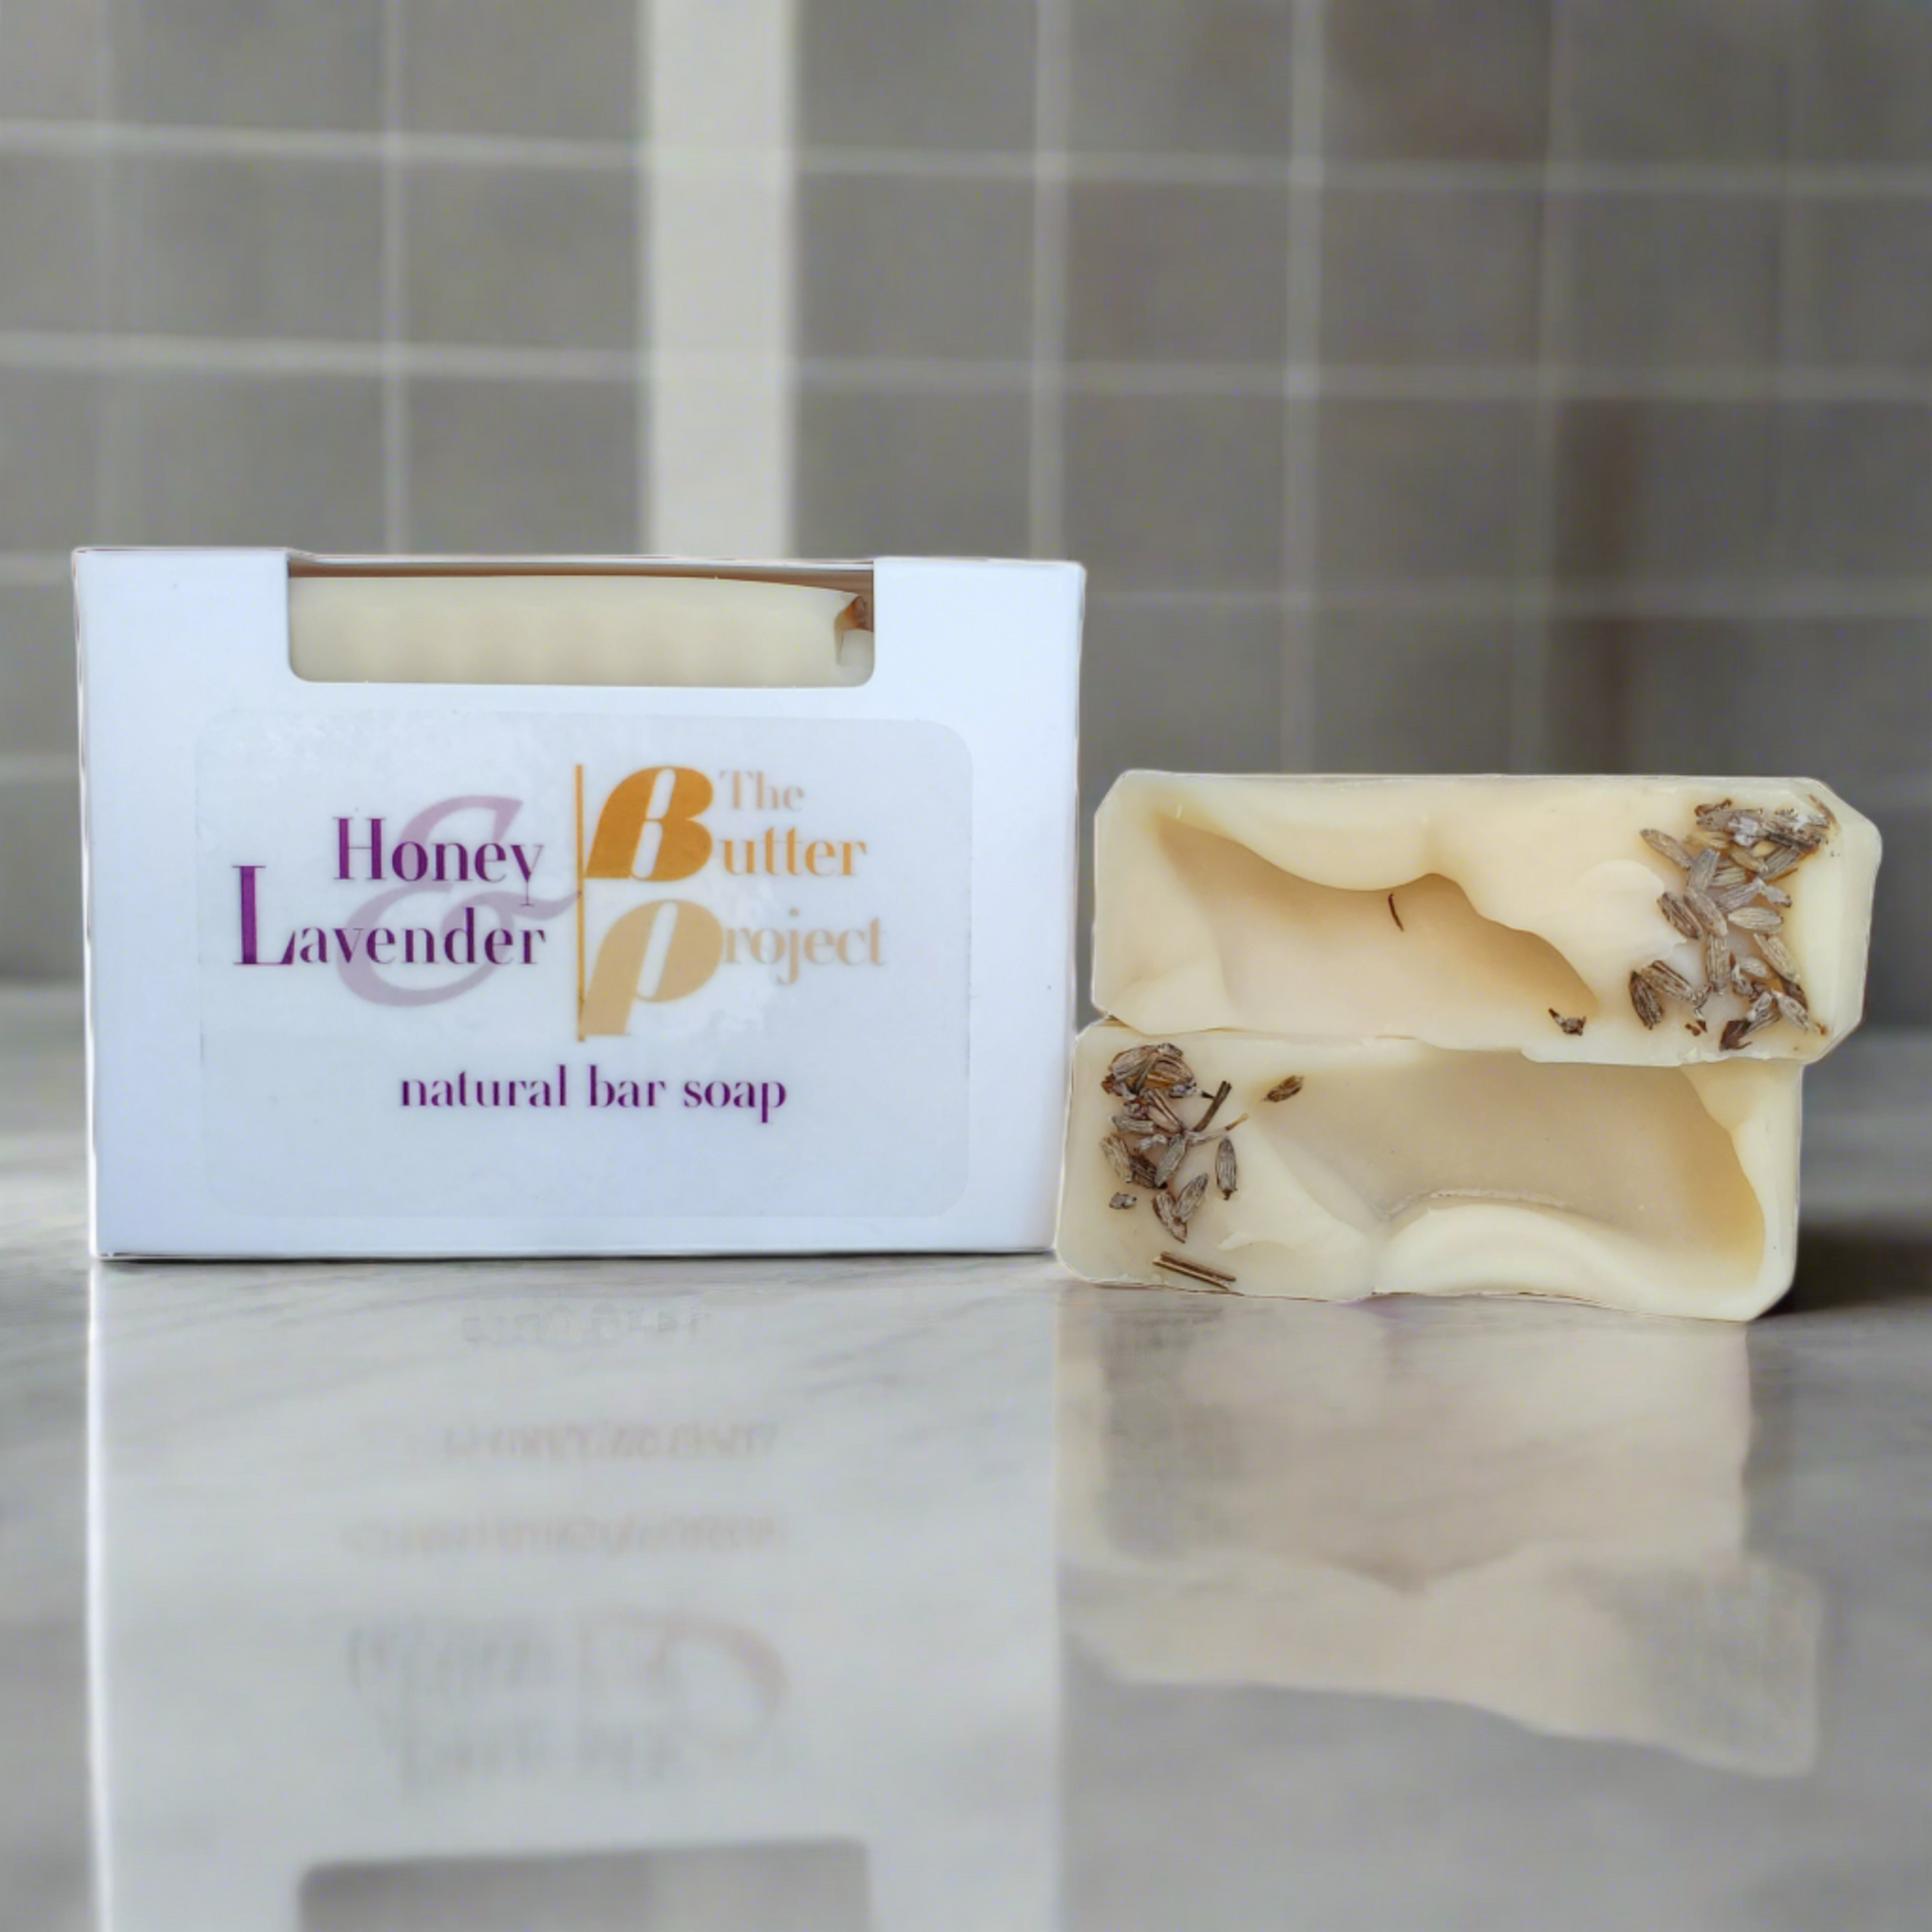 Image of Honey & Lavender Natural Bar Soap box and two bars of Honey & Lavender Natural Bar Soap from The Butter Project.